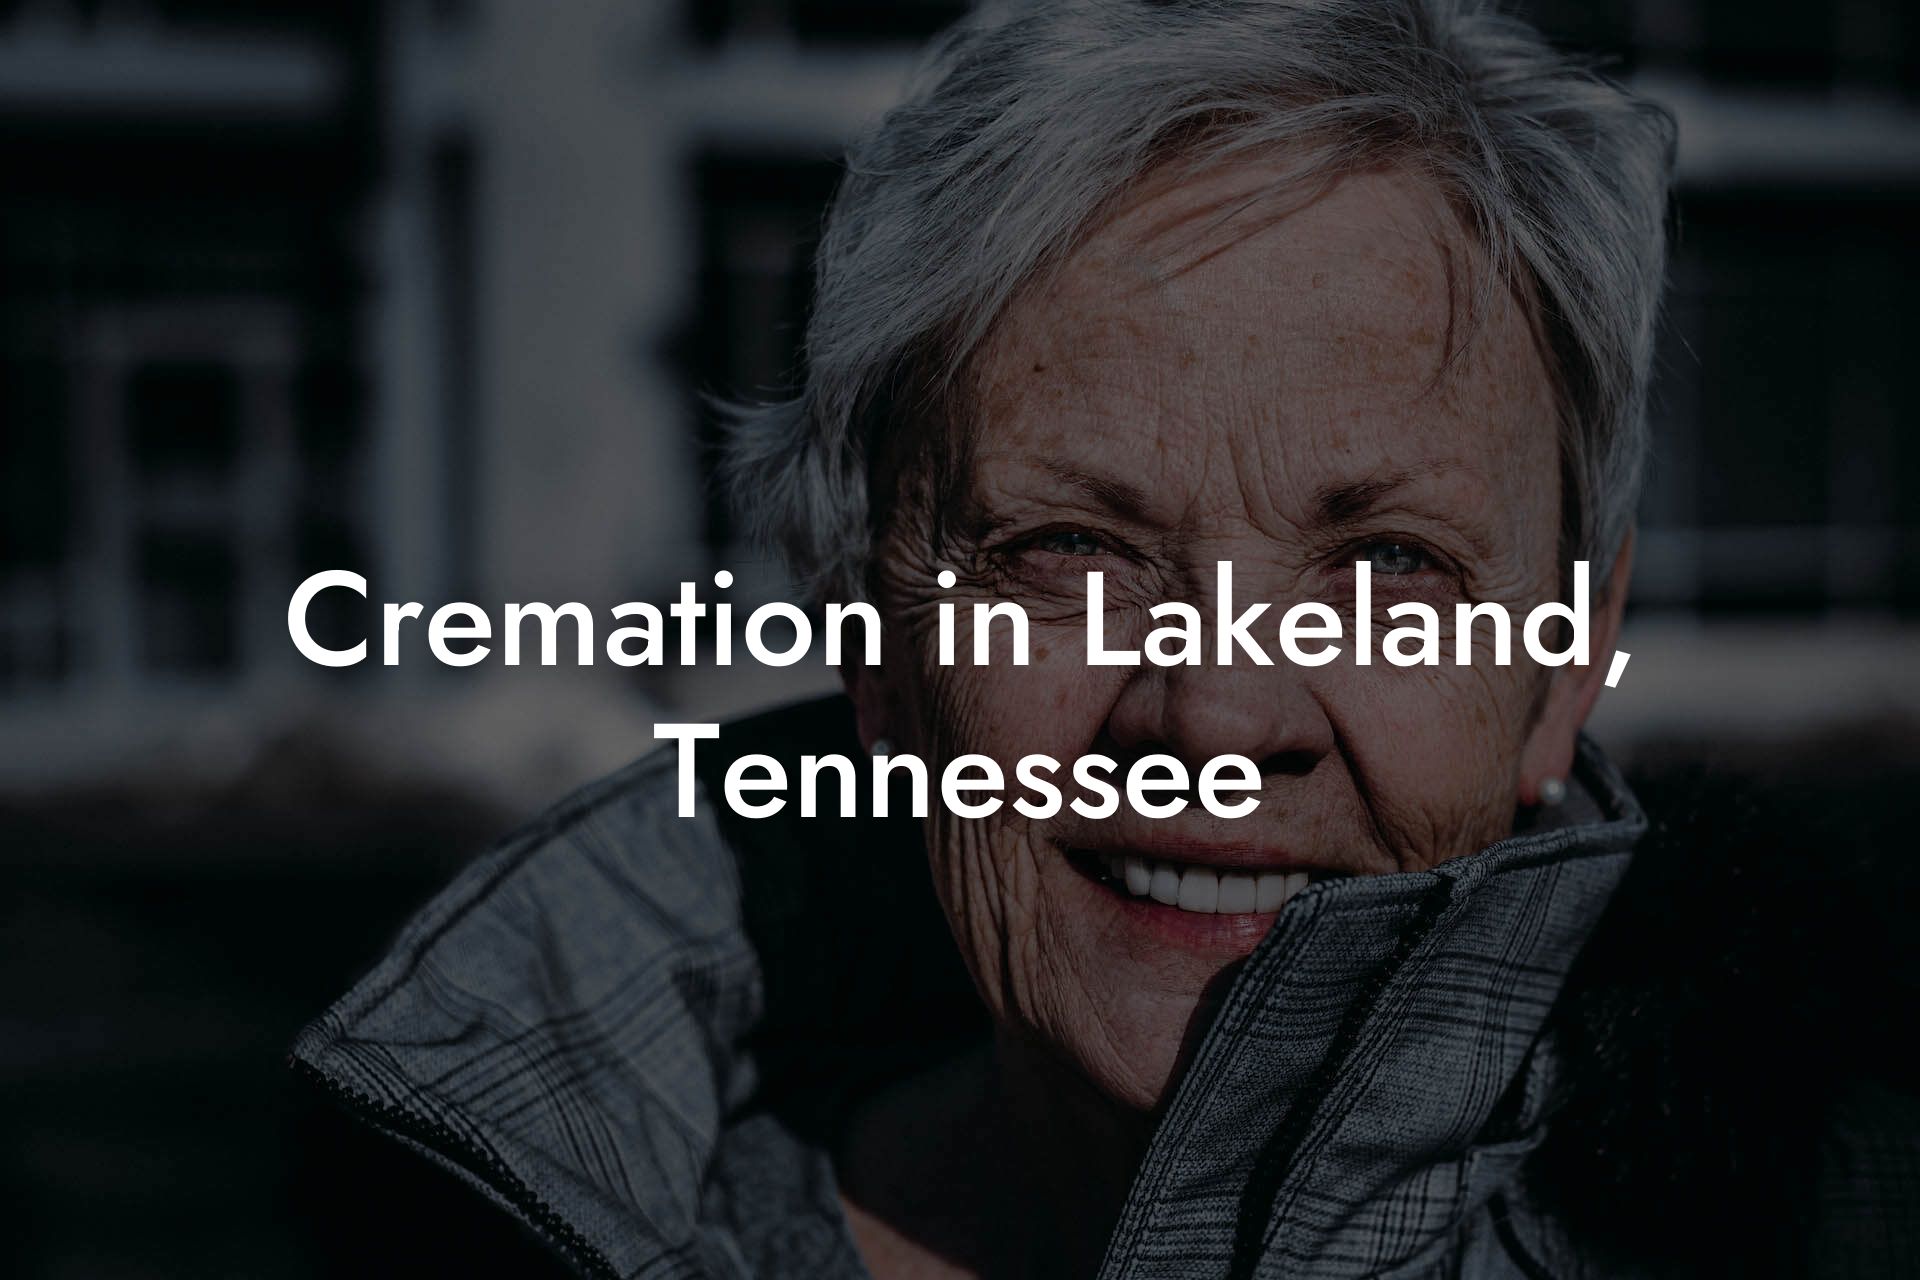 Cremation in Lakeland, Tennessee